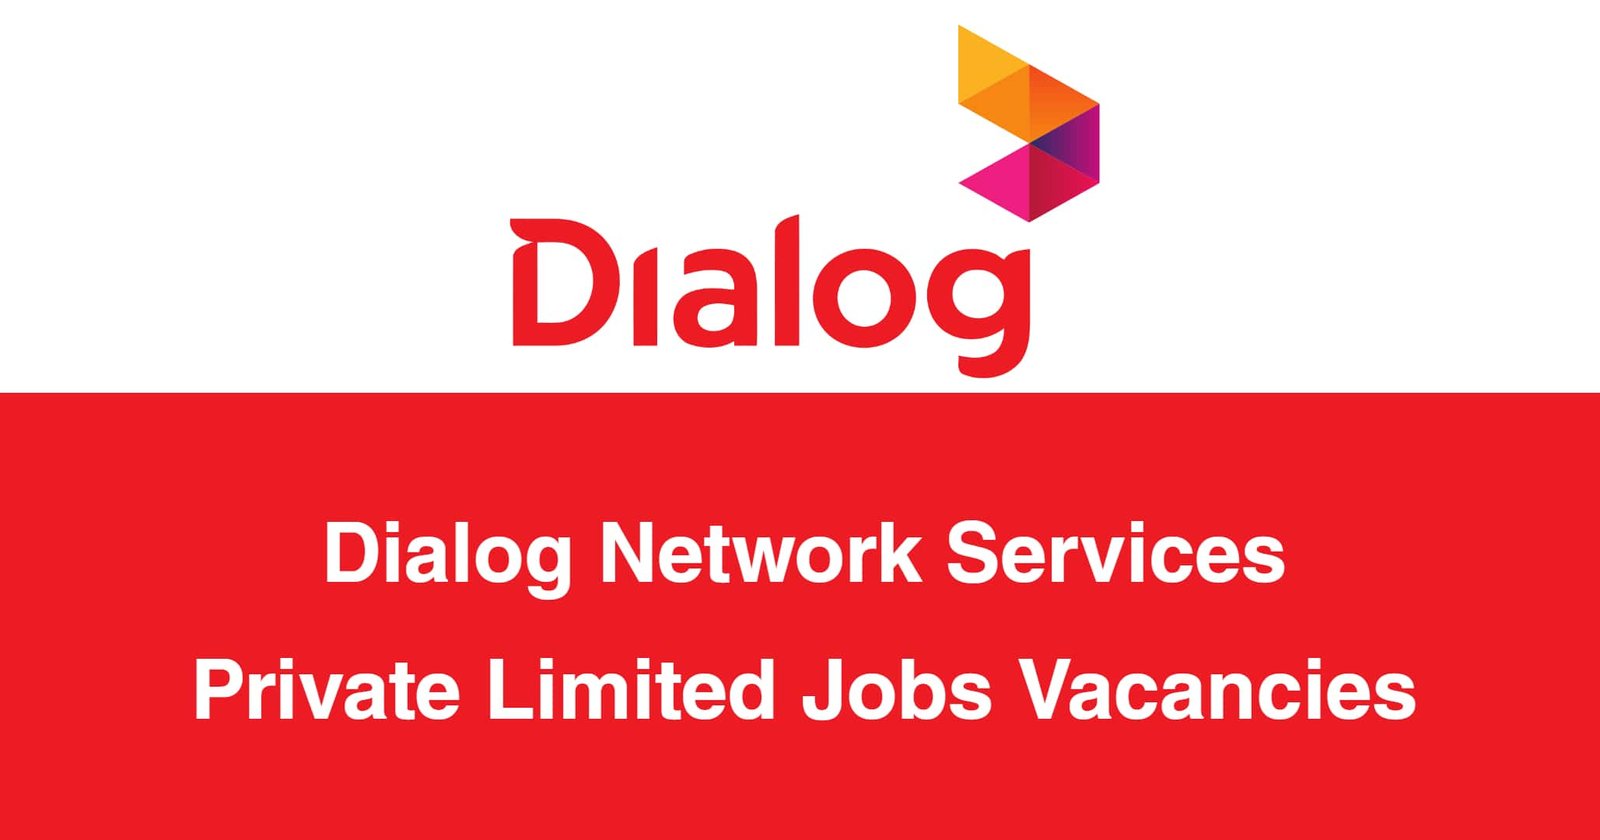 Dialog Network Services Private Limited Jobs Vacancies